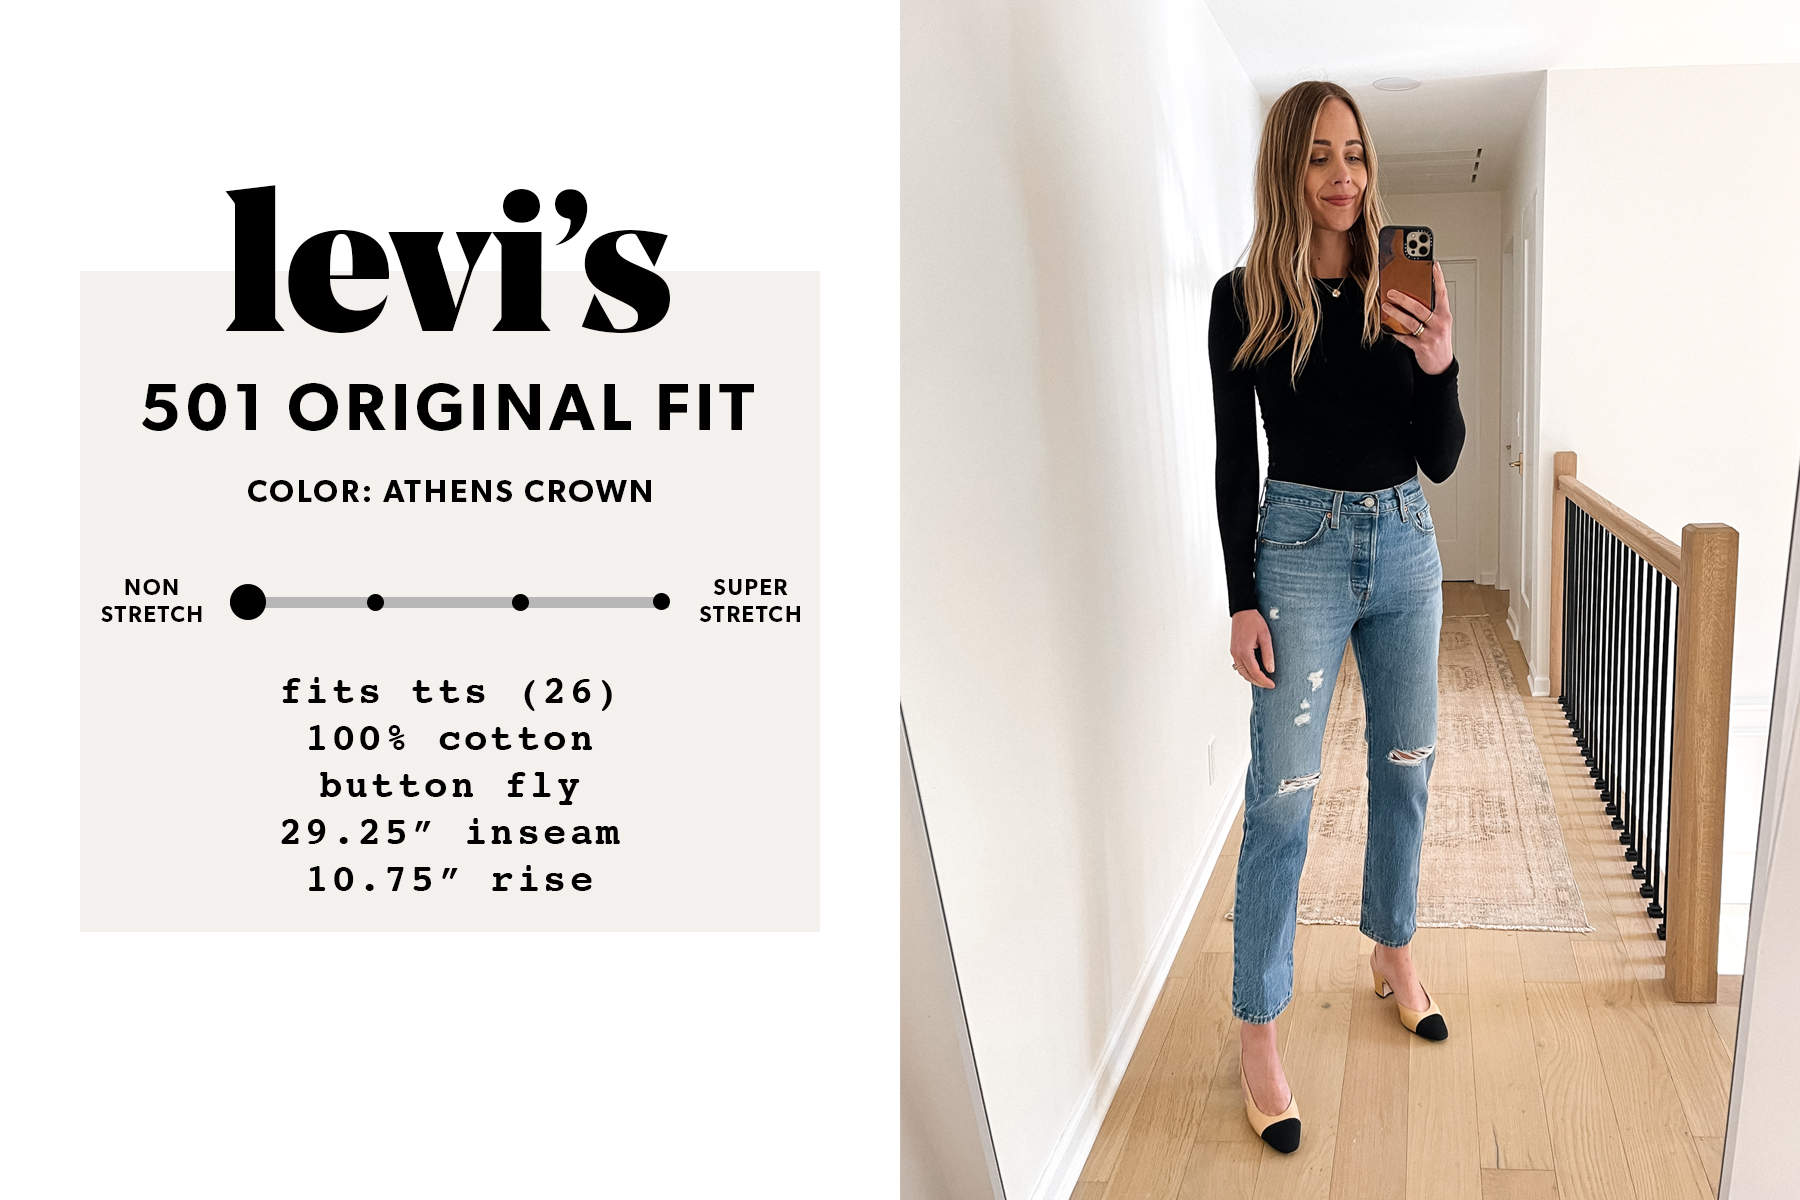 dilute suck dam The Complete Guide to Buying Levi's Jeans for Women - Fashion Jackson